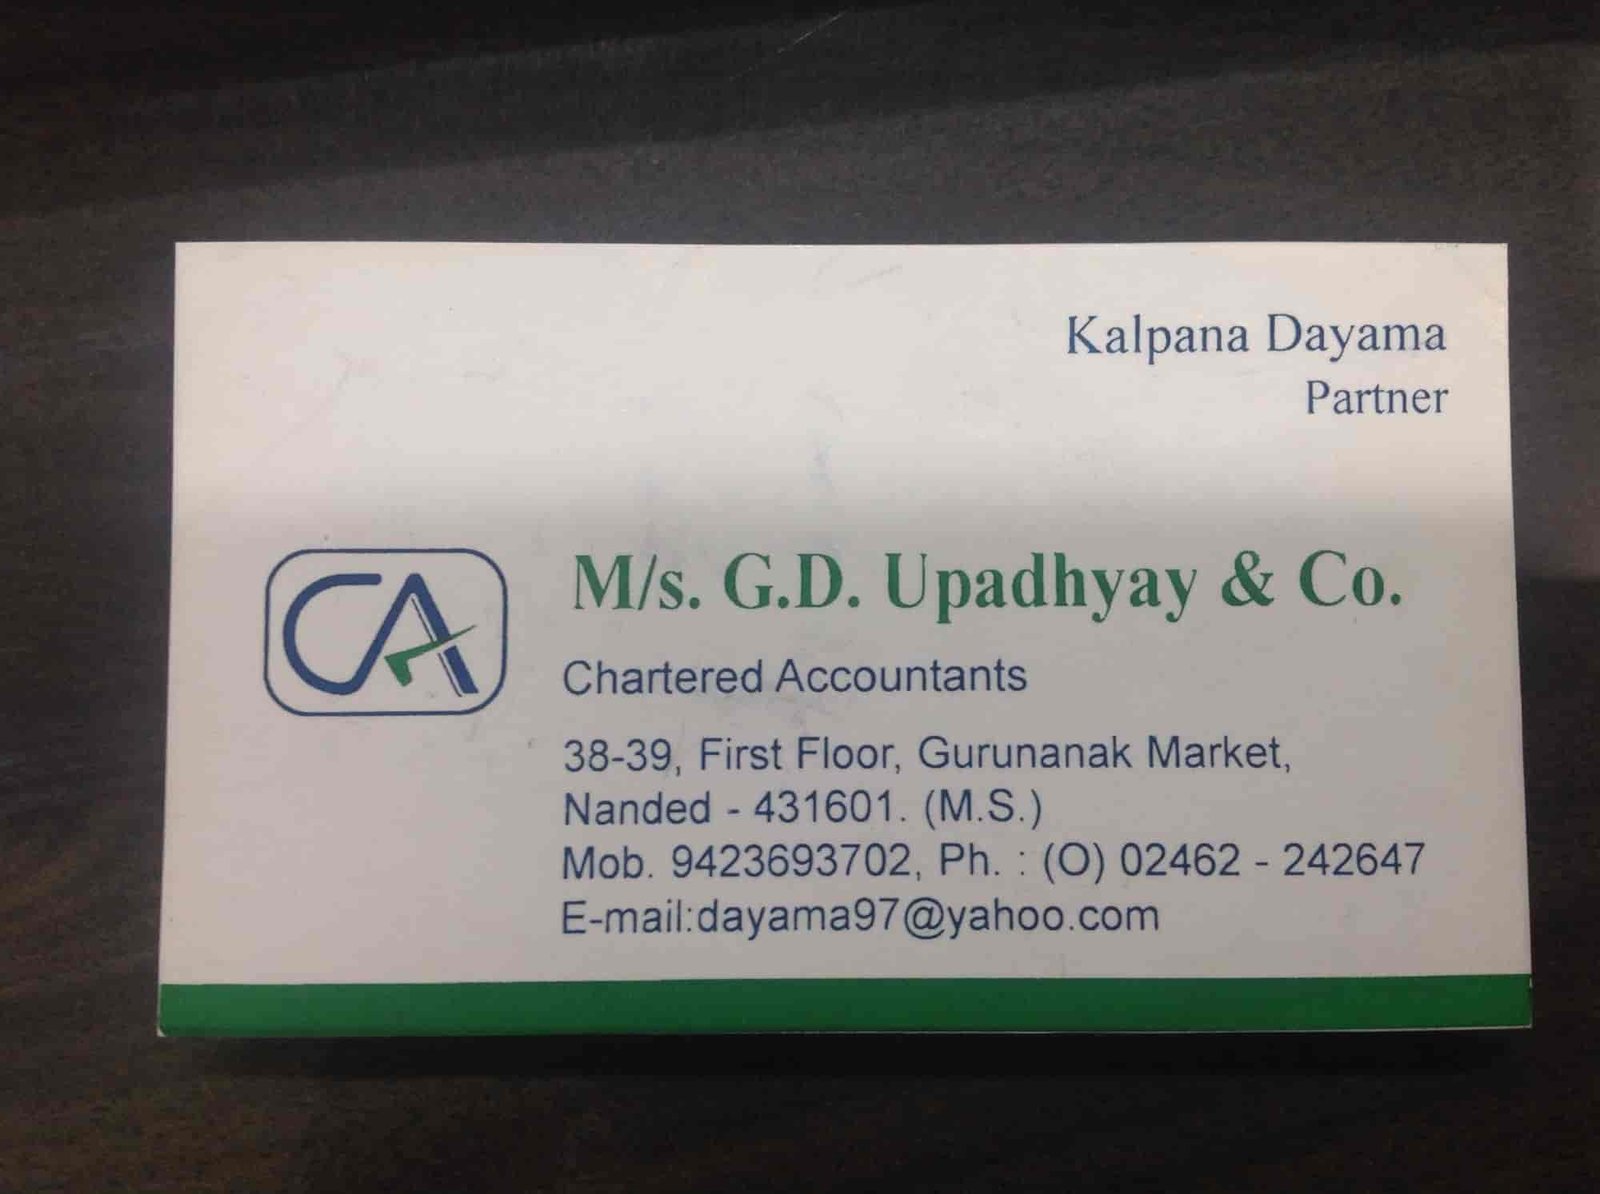 M/s. G.D Upadhyay & Co 